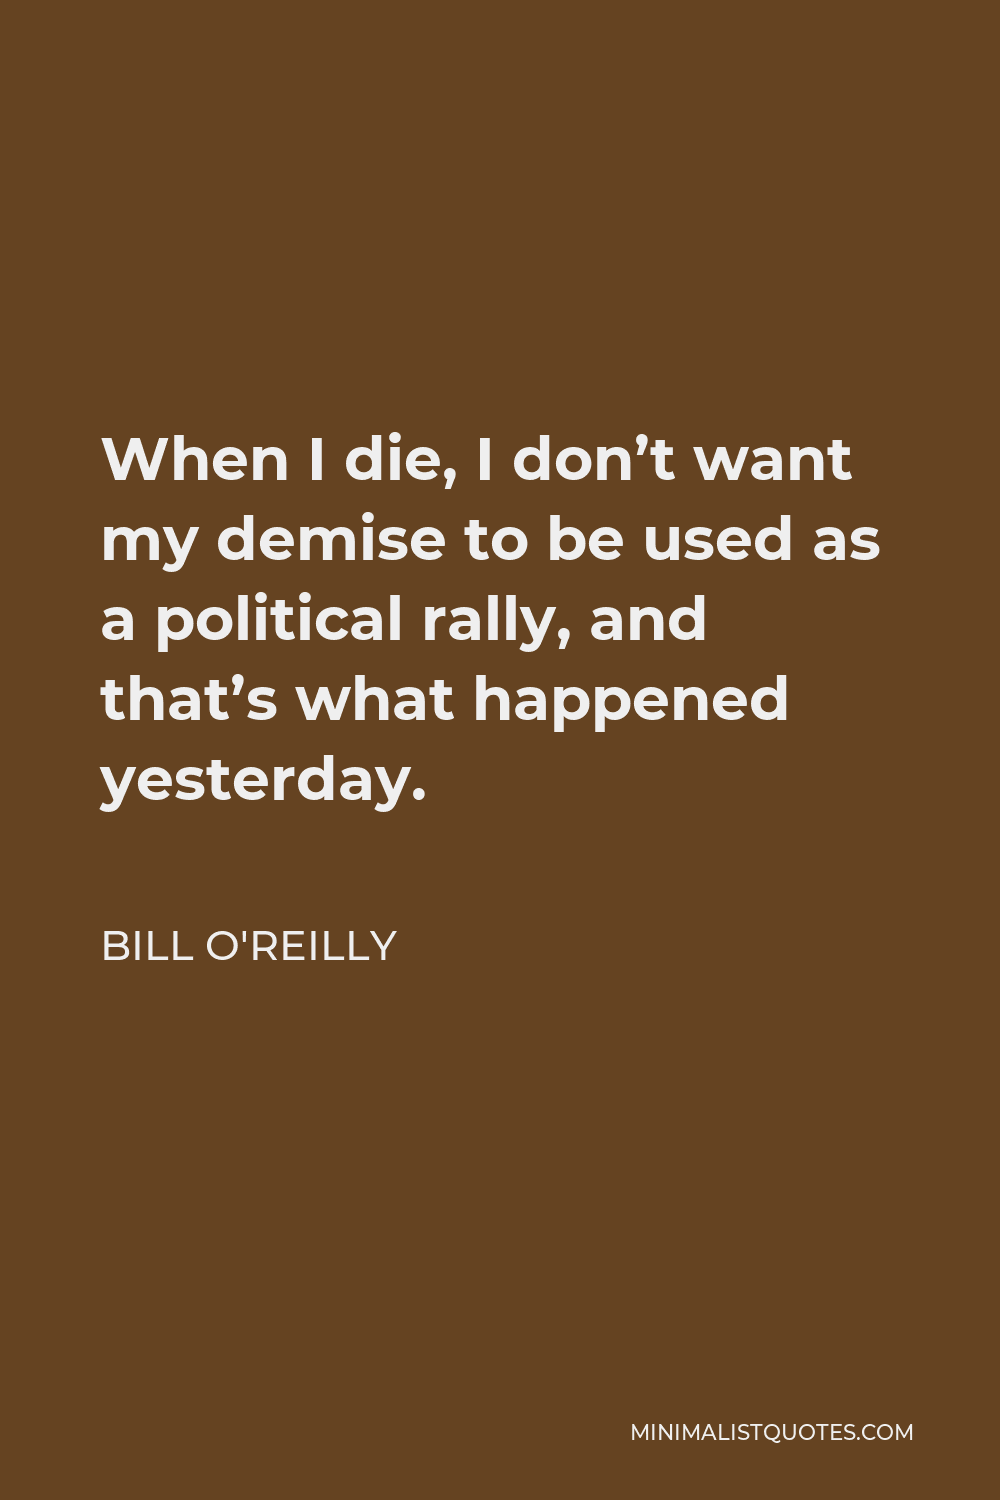 Bill O'Reilly Quote - When I die, I don’t want my demise to be used as a political rally, and that’s what happened yesterday.